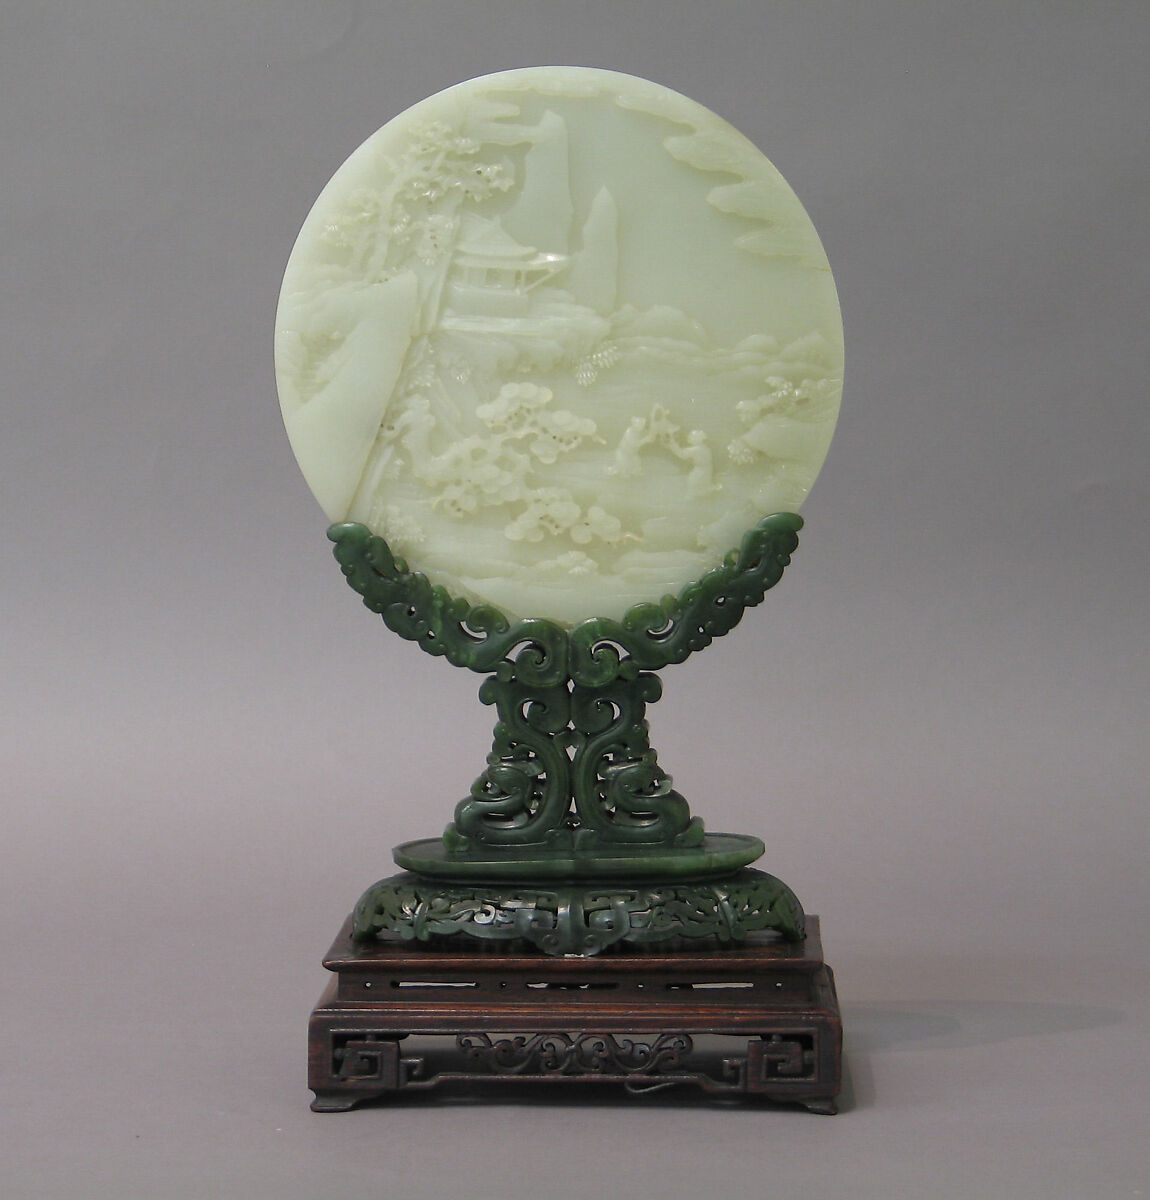 Table screen, Nephrite, white with light-greenish tint, stand of spinach-green, China 